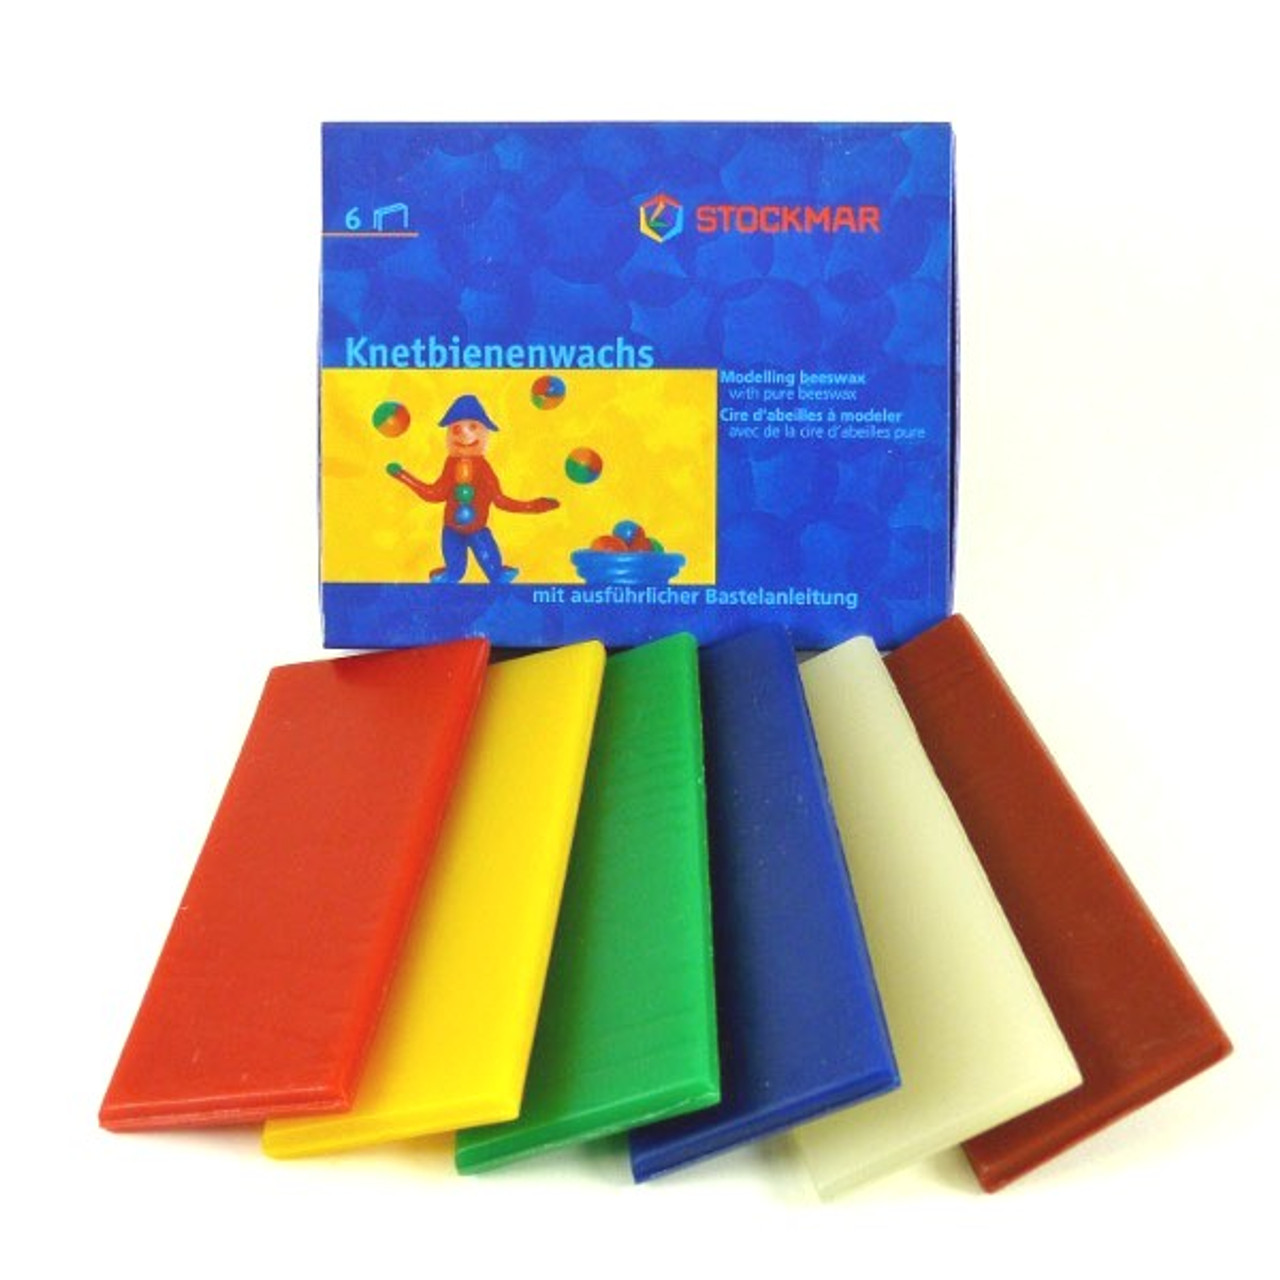 Stockmar Modeling Beeswax - 6 Colors